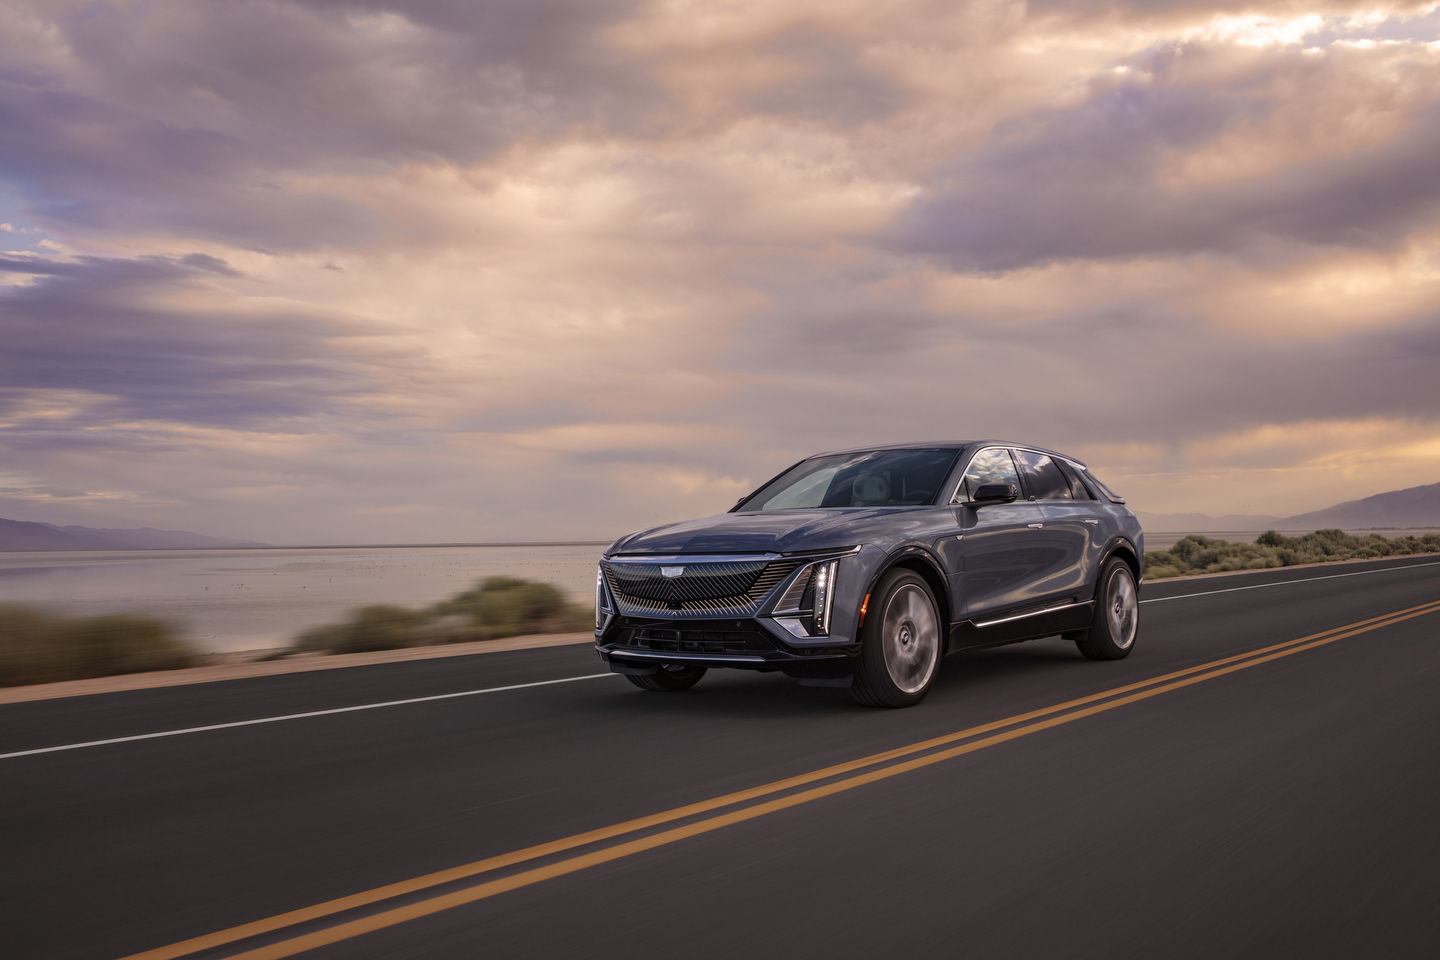 The All-New Cadillac LYRIQ: 5 Things You Should Know